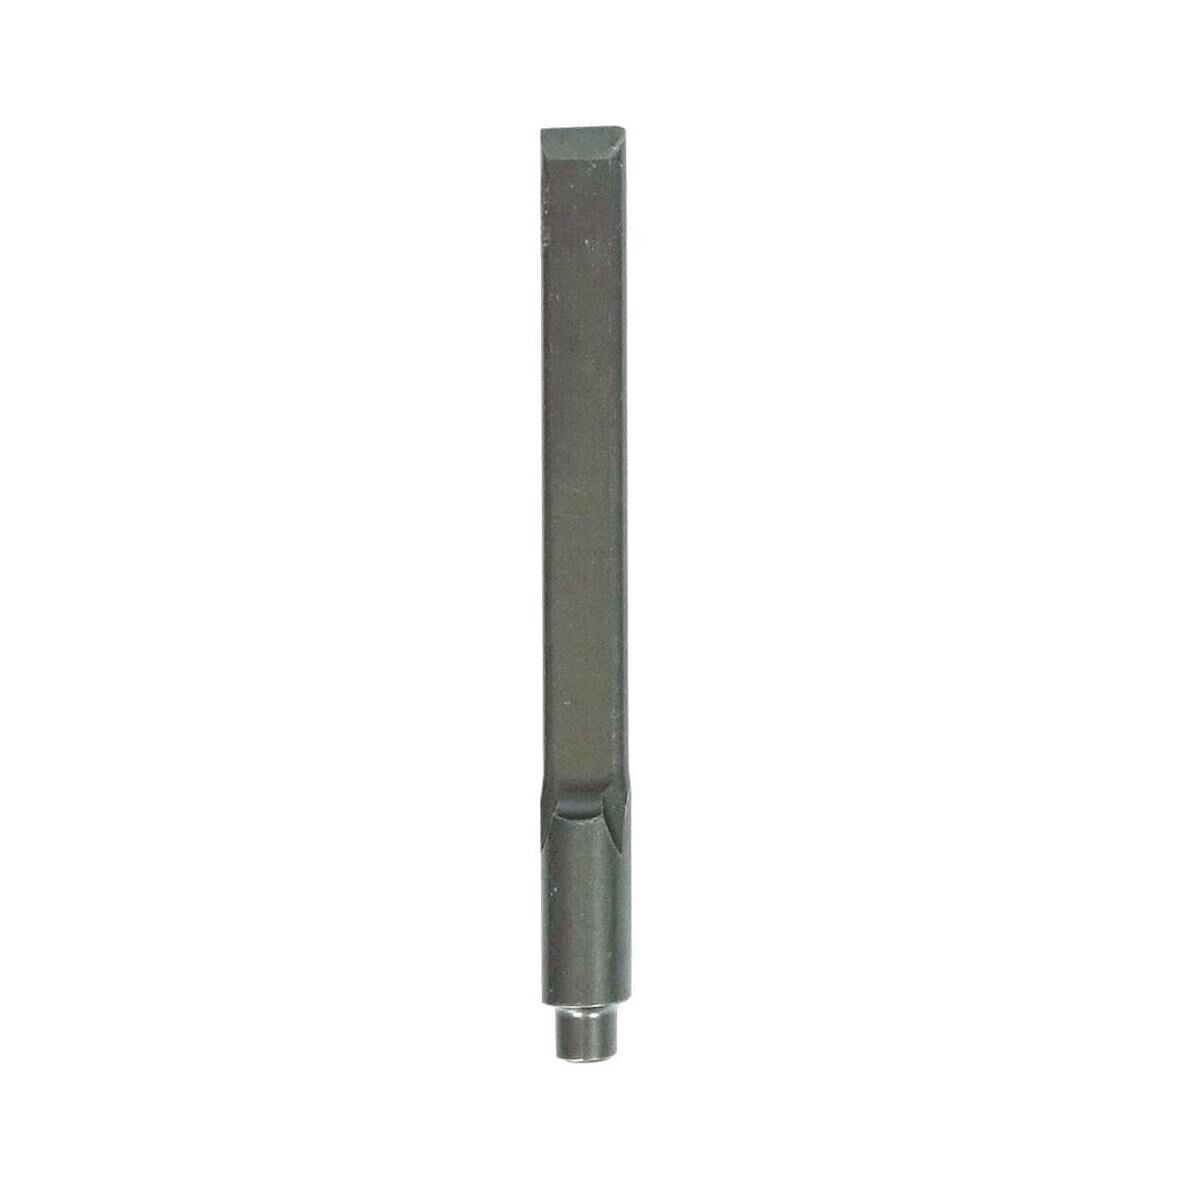 Chicago Pneumatic FLACHMEISSEL 6 MM